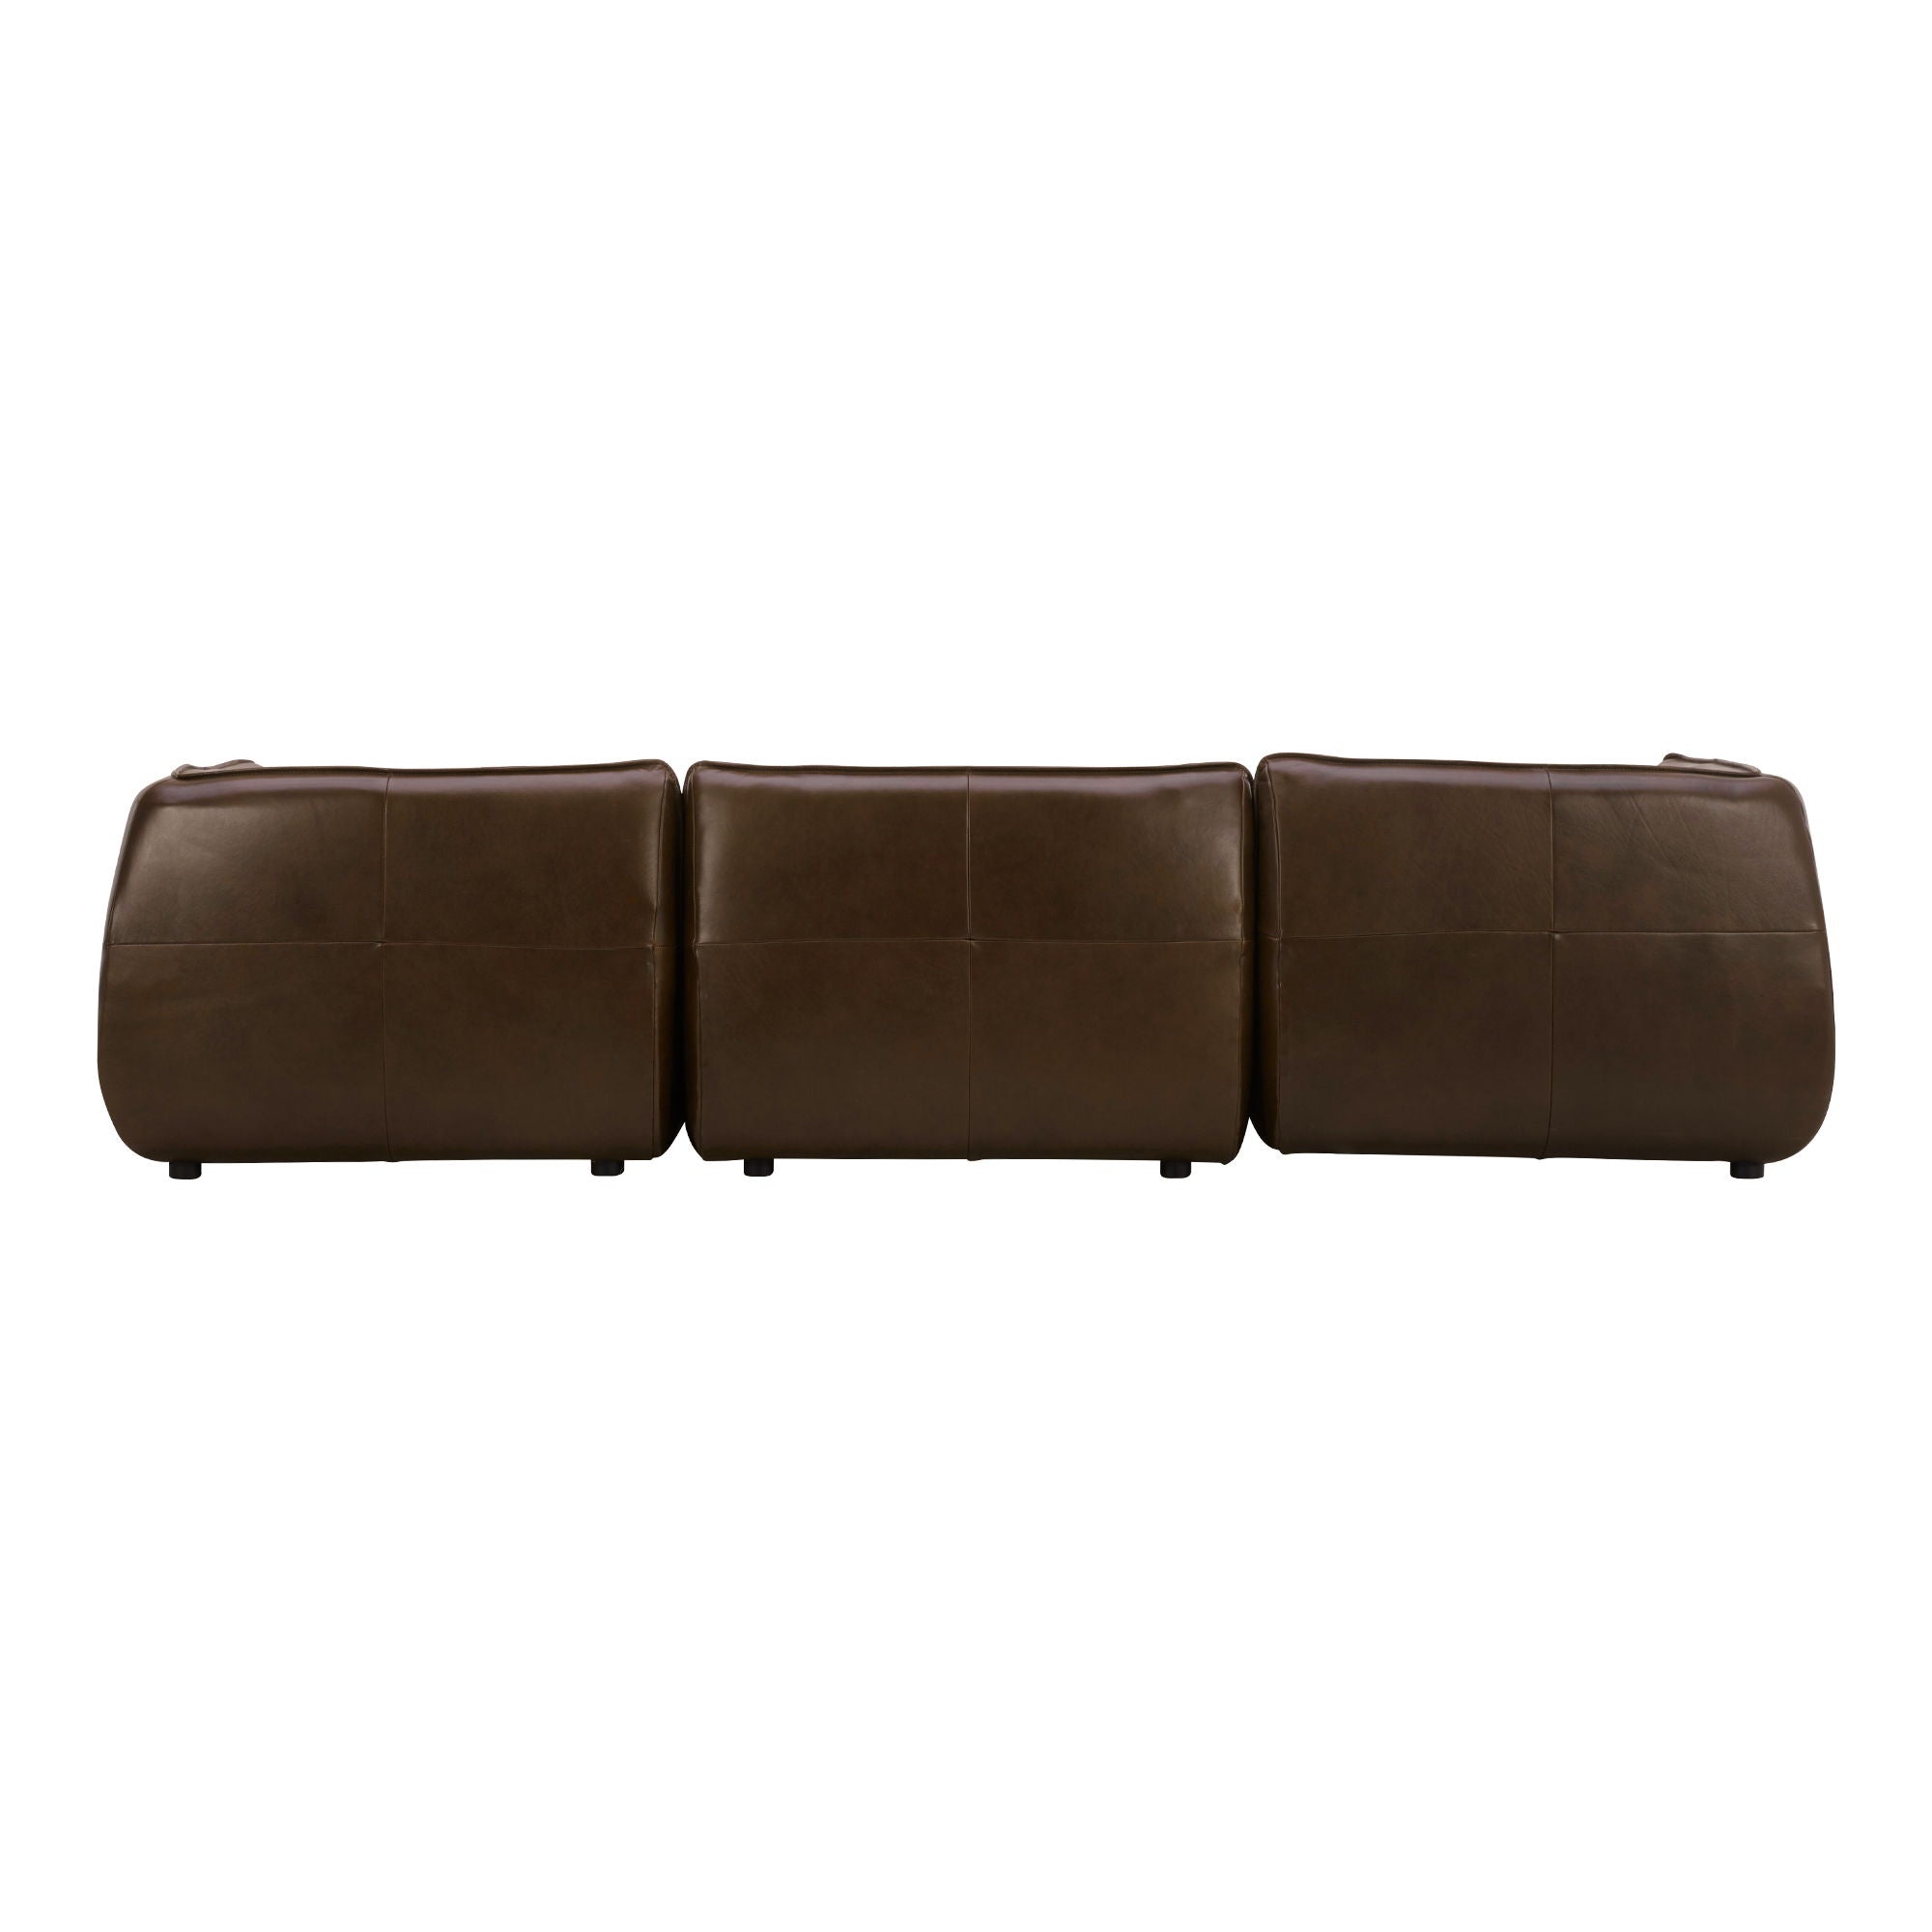 Brown Leather Sectional - Modular, Zeppelin Lounge